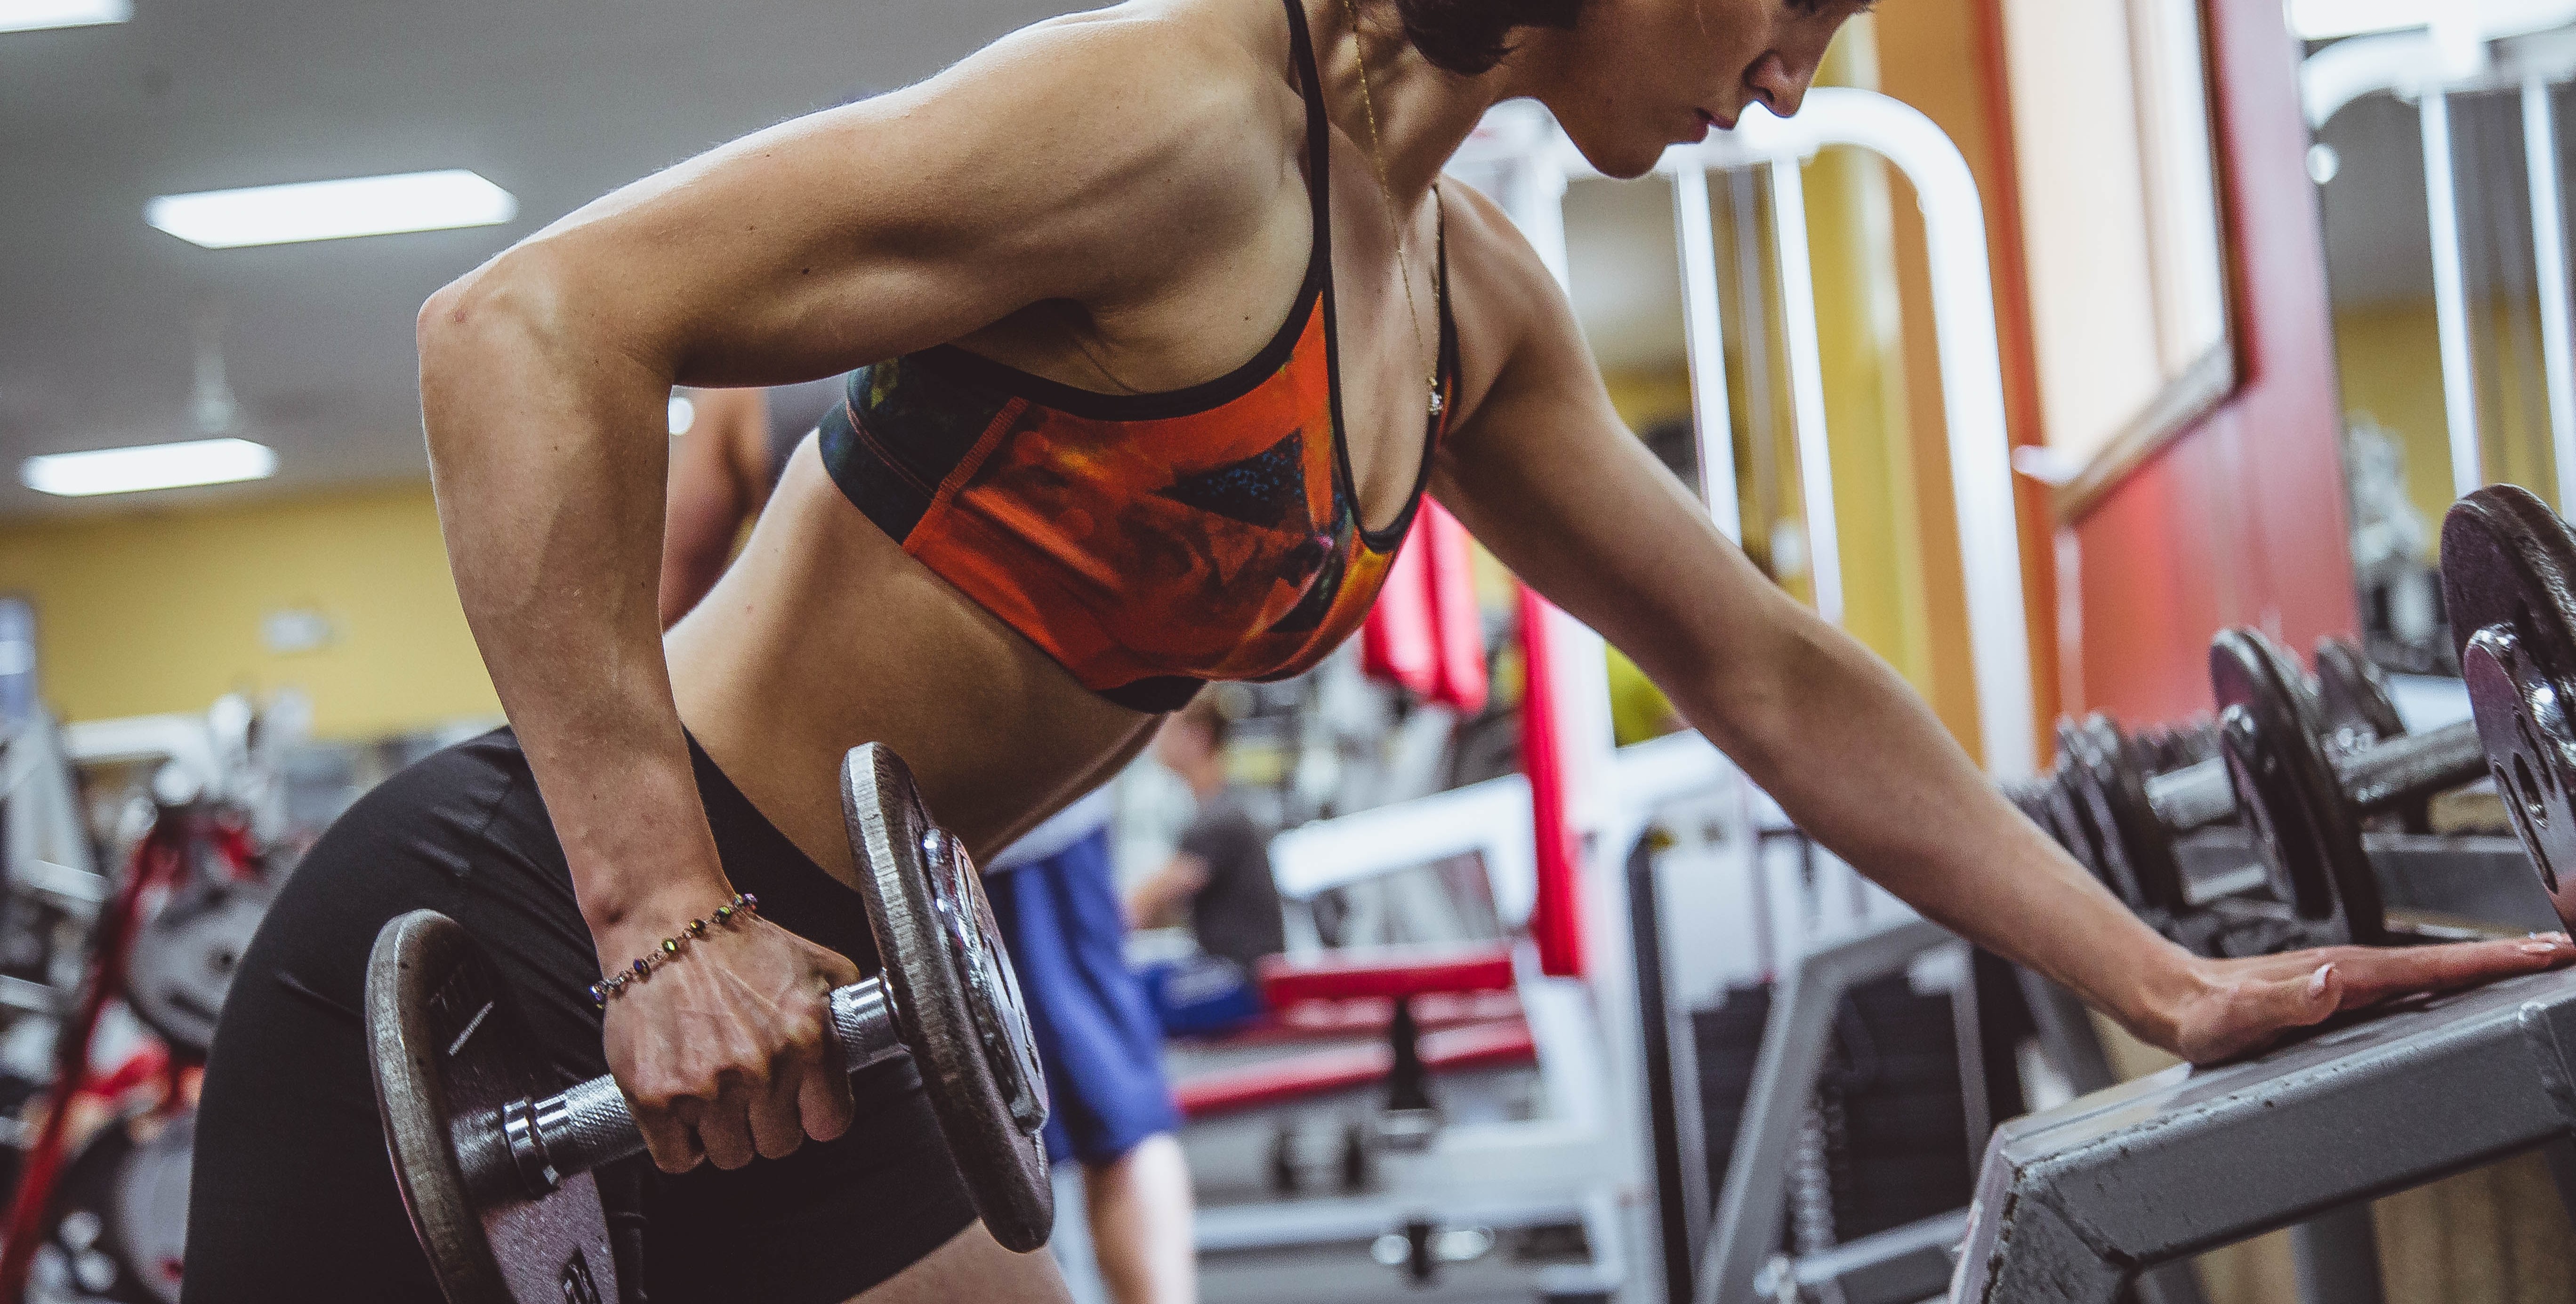 Weightlifting may also reduce symptoms of depression and anxiety. Image: Alora Griffiths / Unsplash